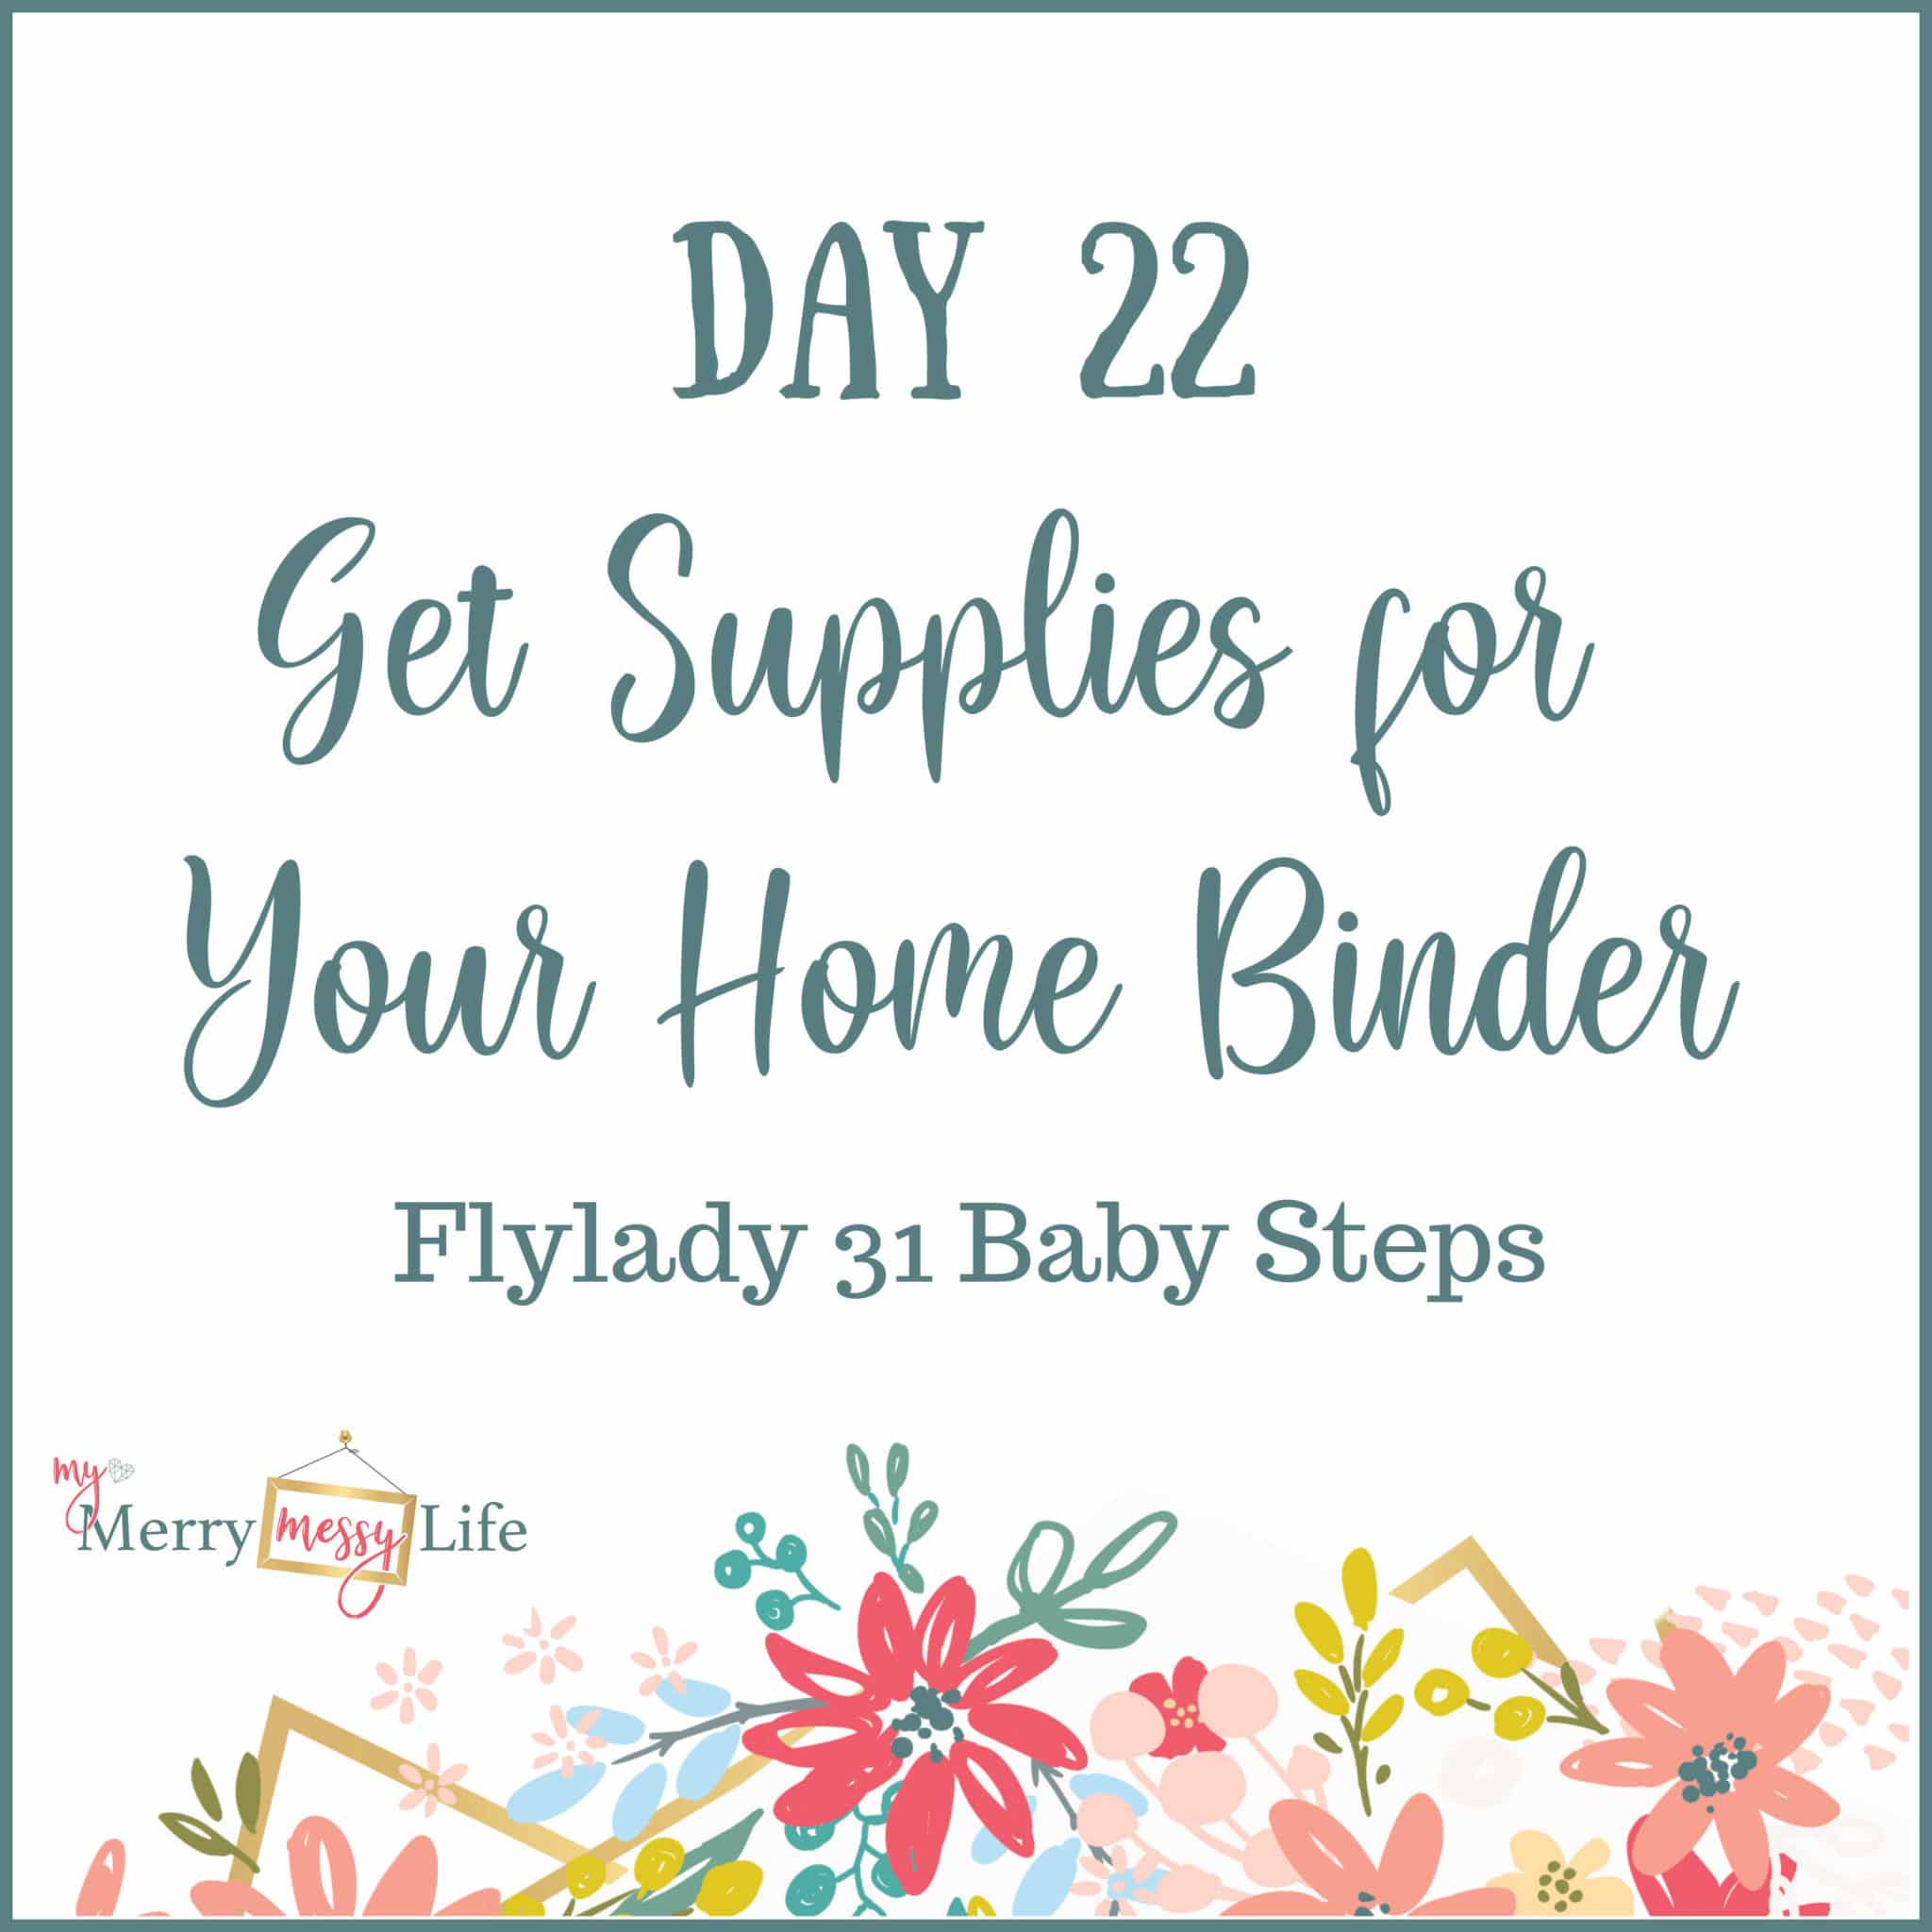 Flylady 31 Baby Steps - Day 22 - Get More Supplies for Your Home Binder